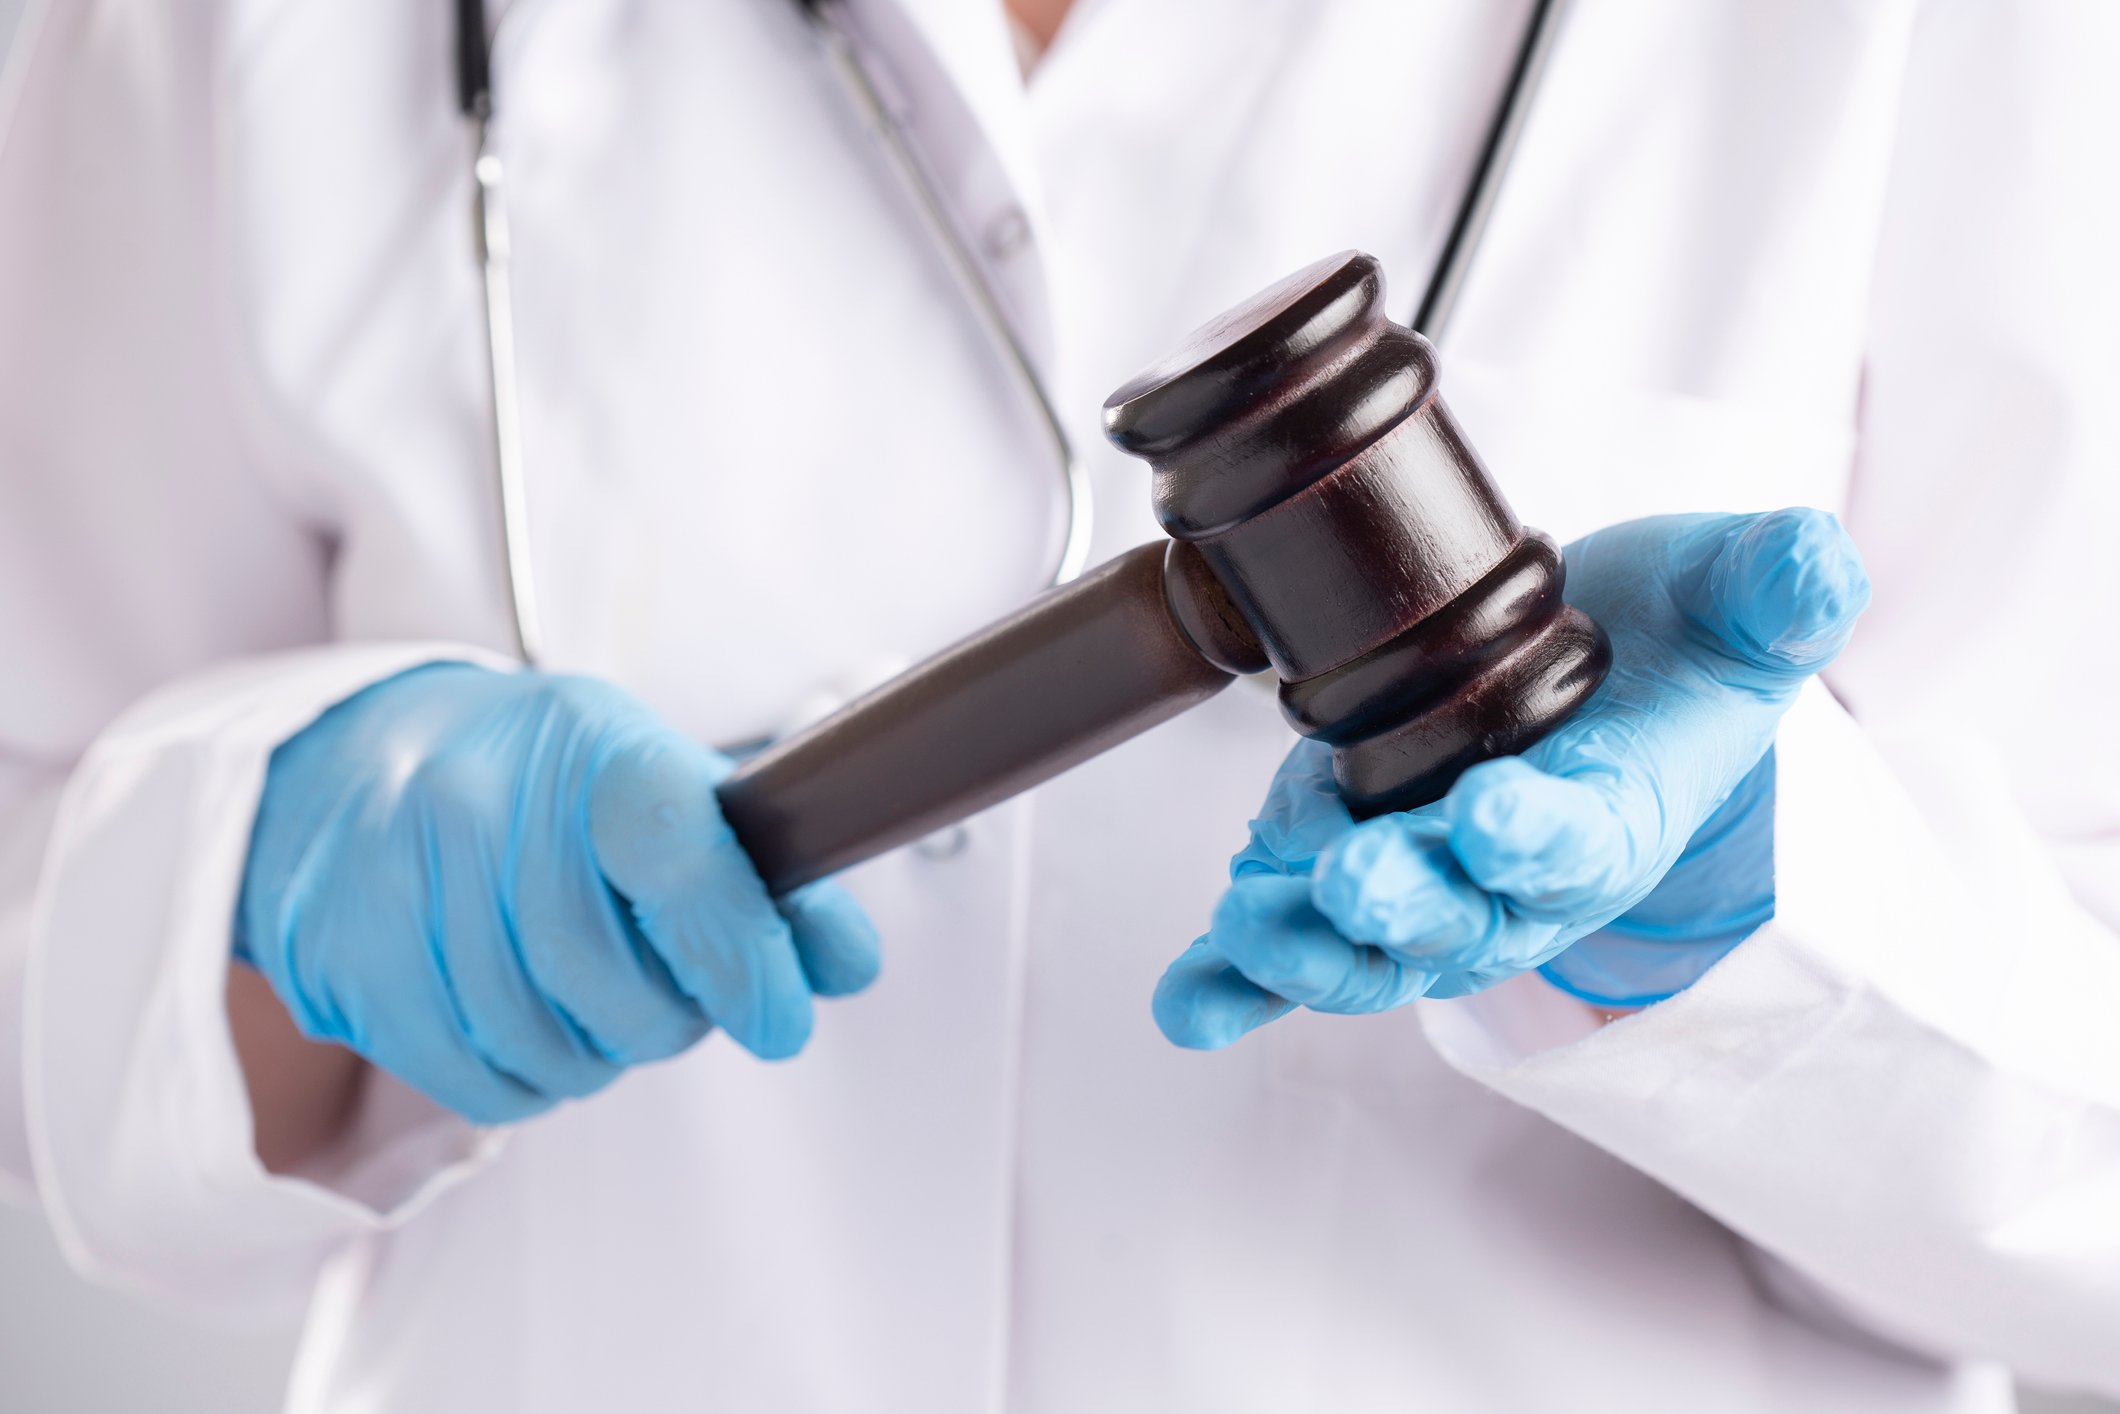 A doctor holds a gavel